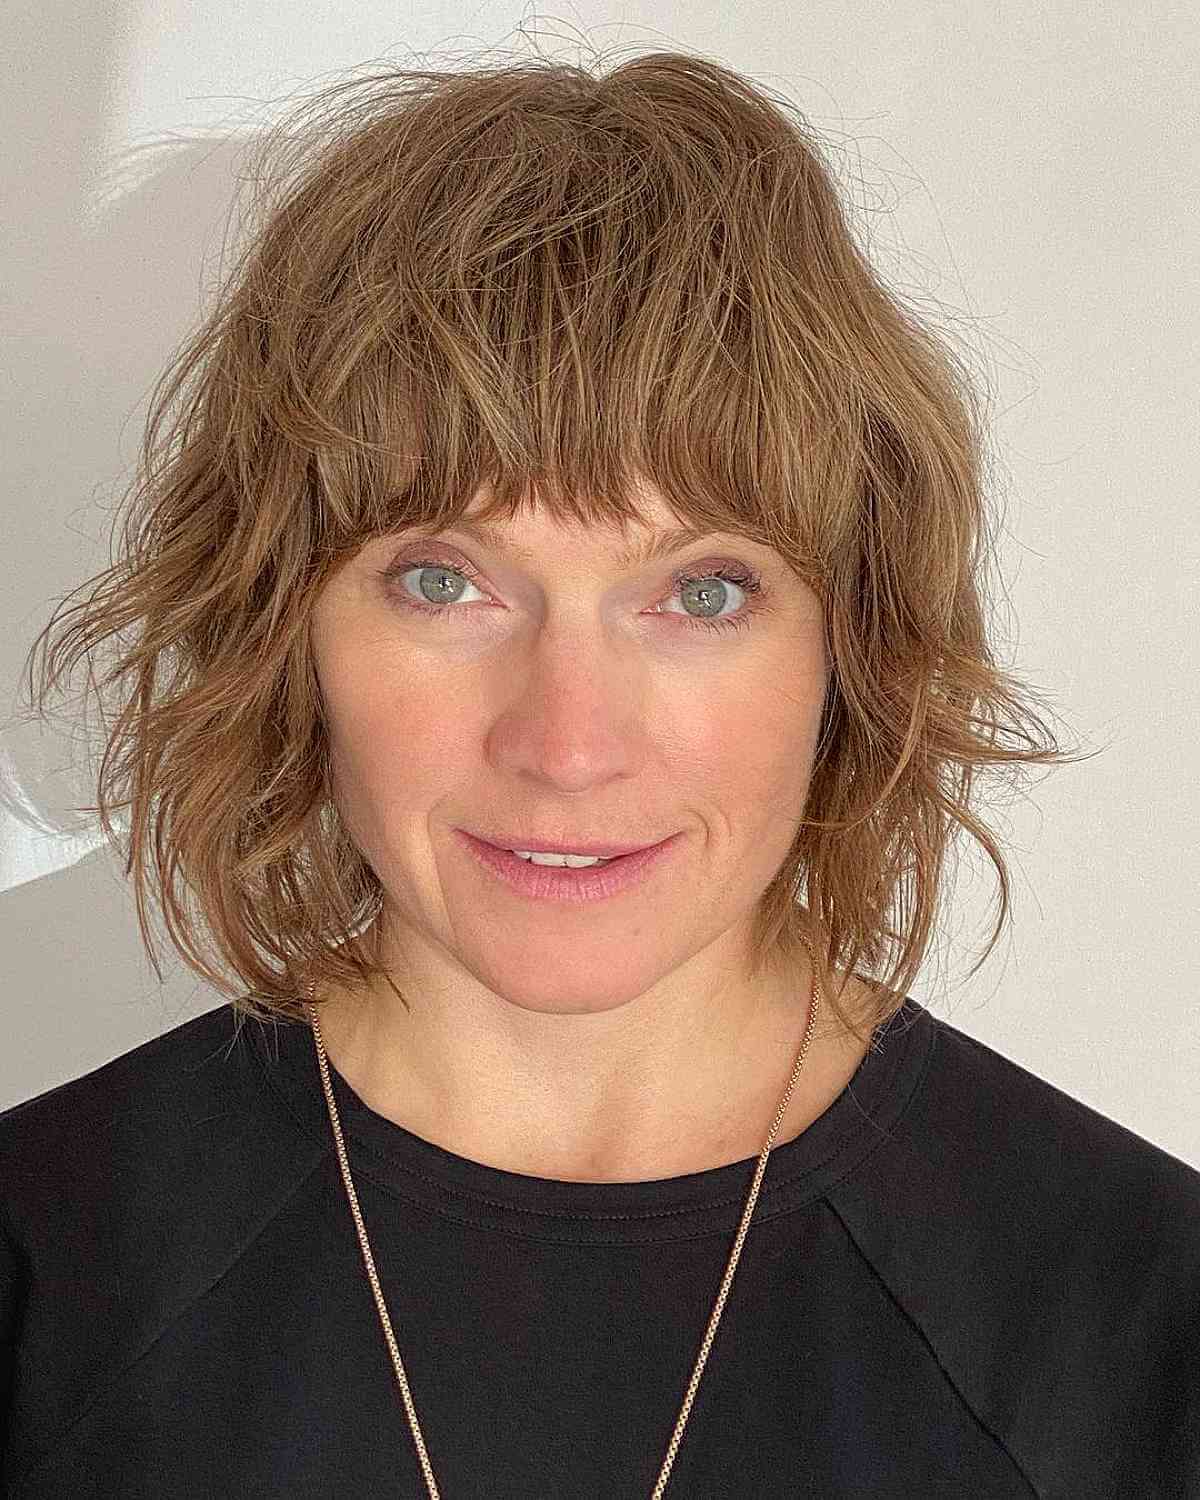 Chin-Length Cut with Tousled Layers and Bangs